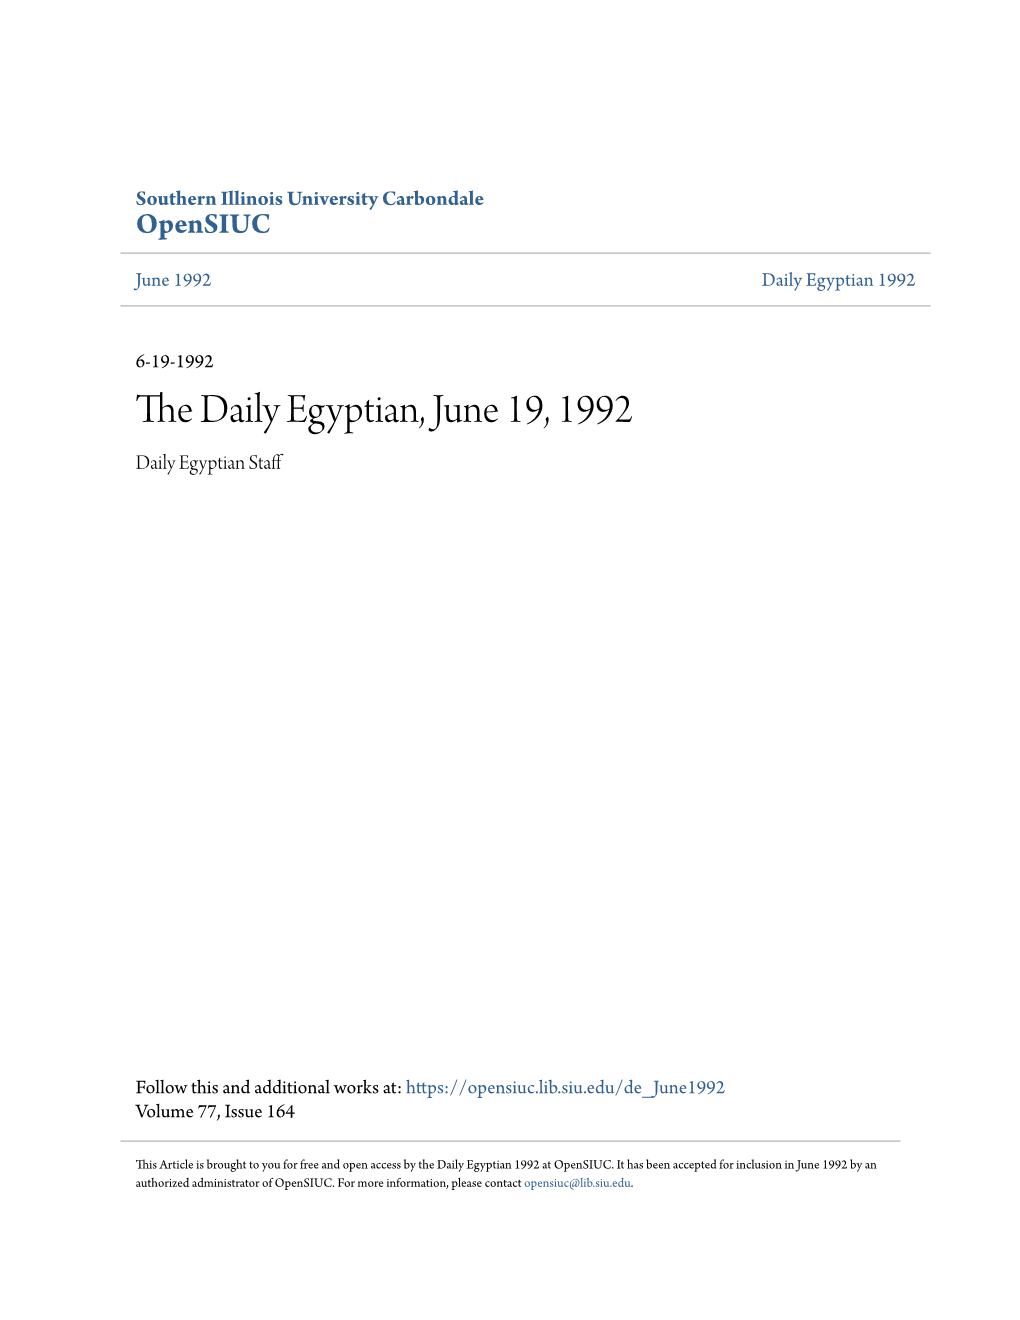 The Daily Egyptian, June 19, 1992